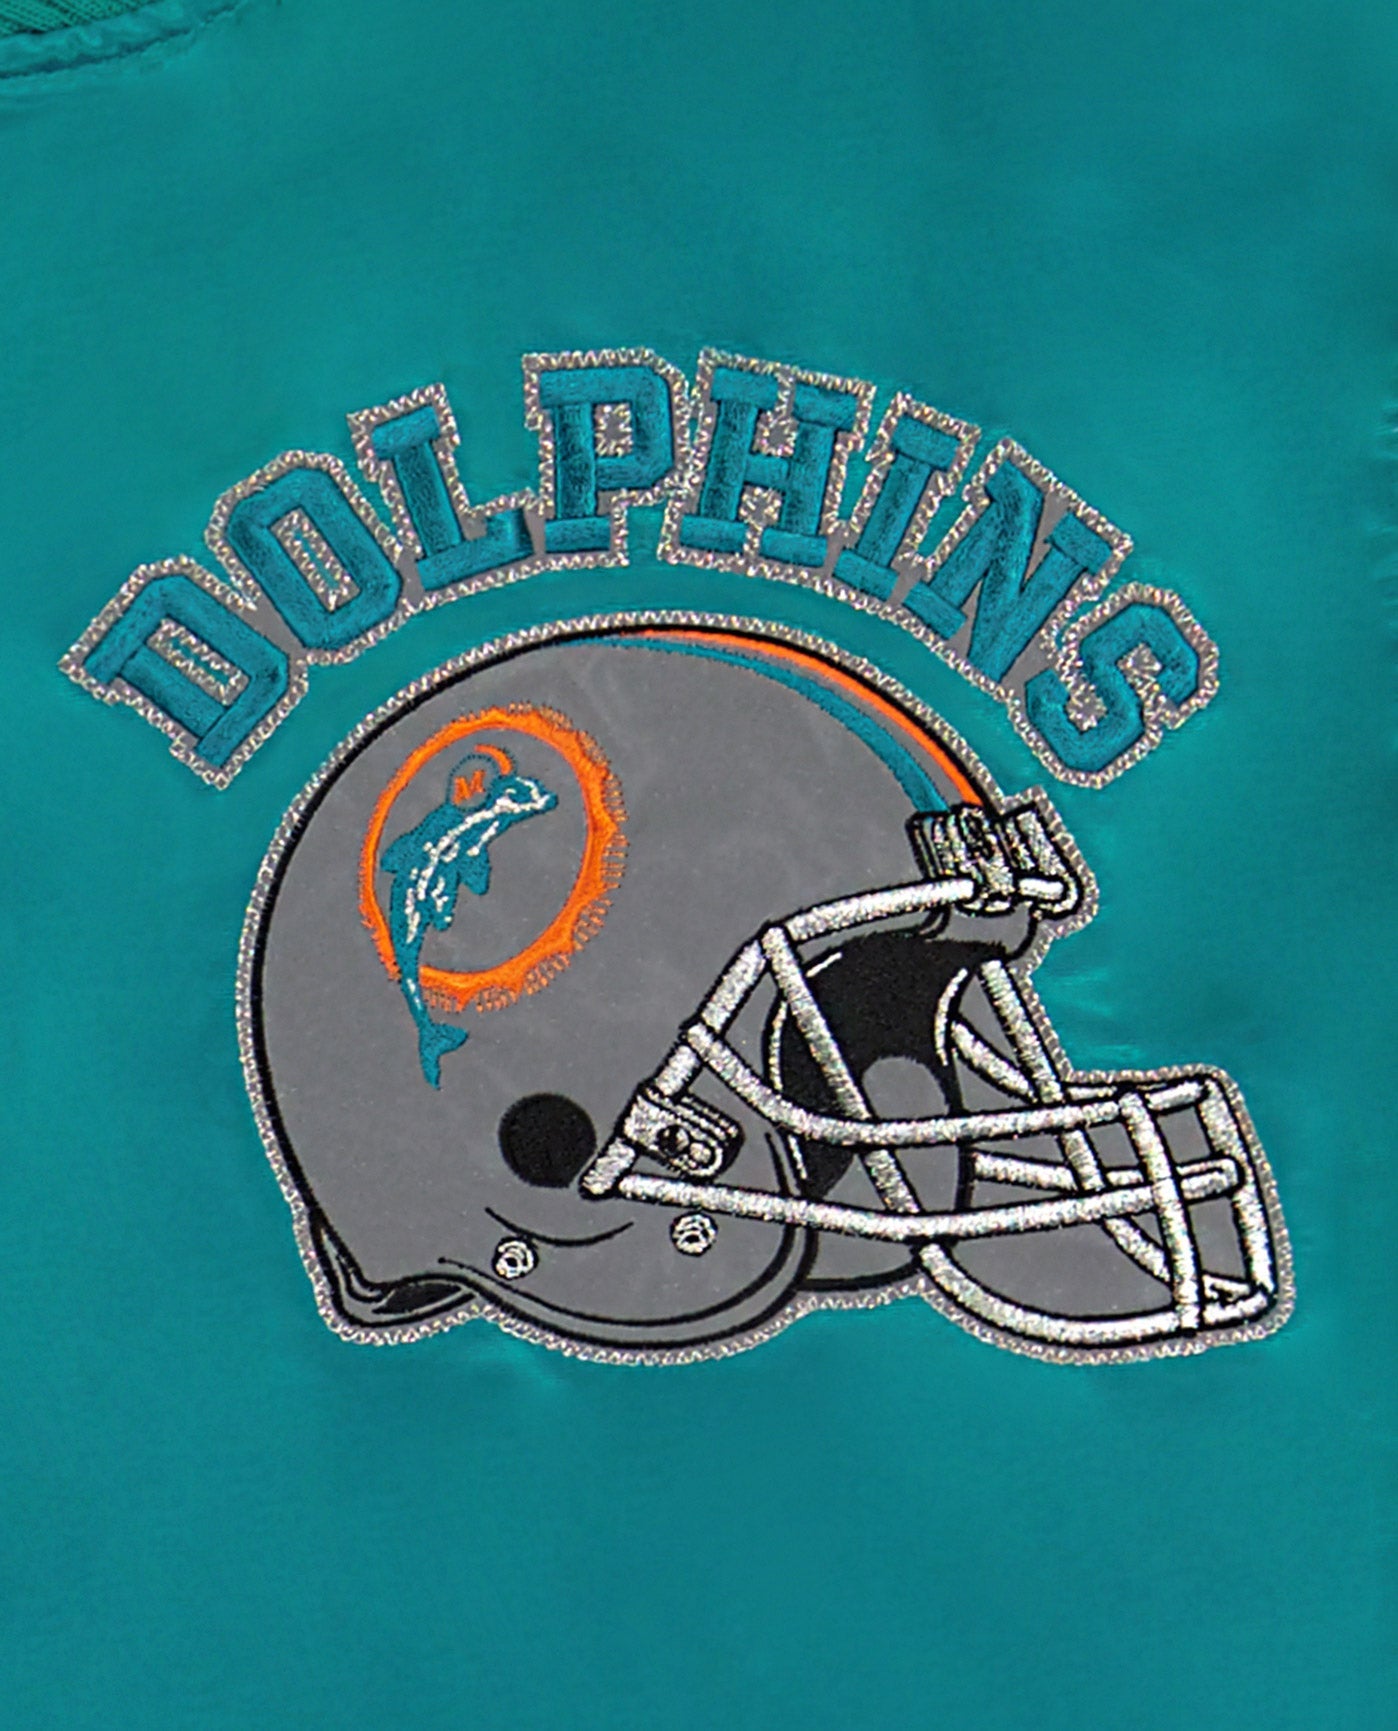 DOLPHINS writing and helmet logo top left chest | Dolphins Aqua